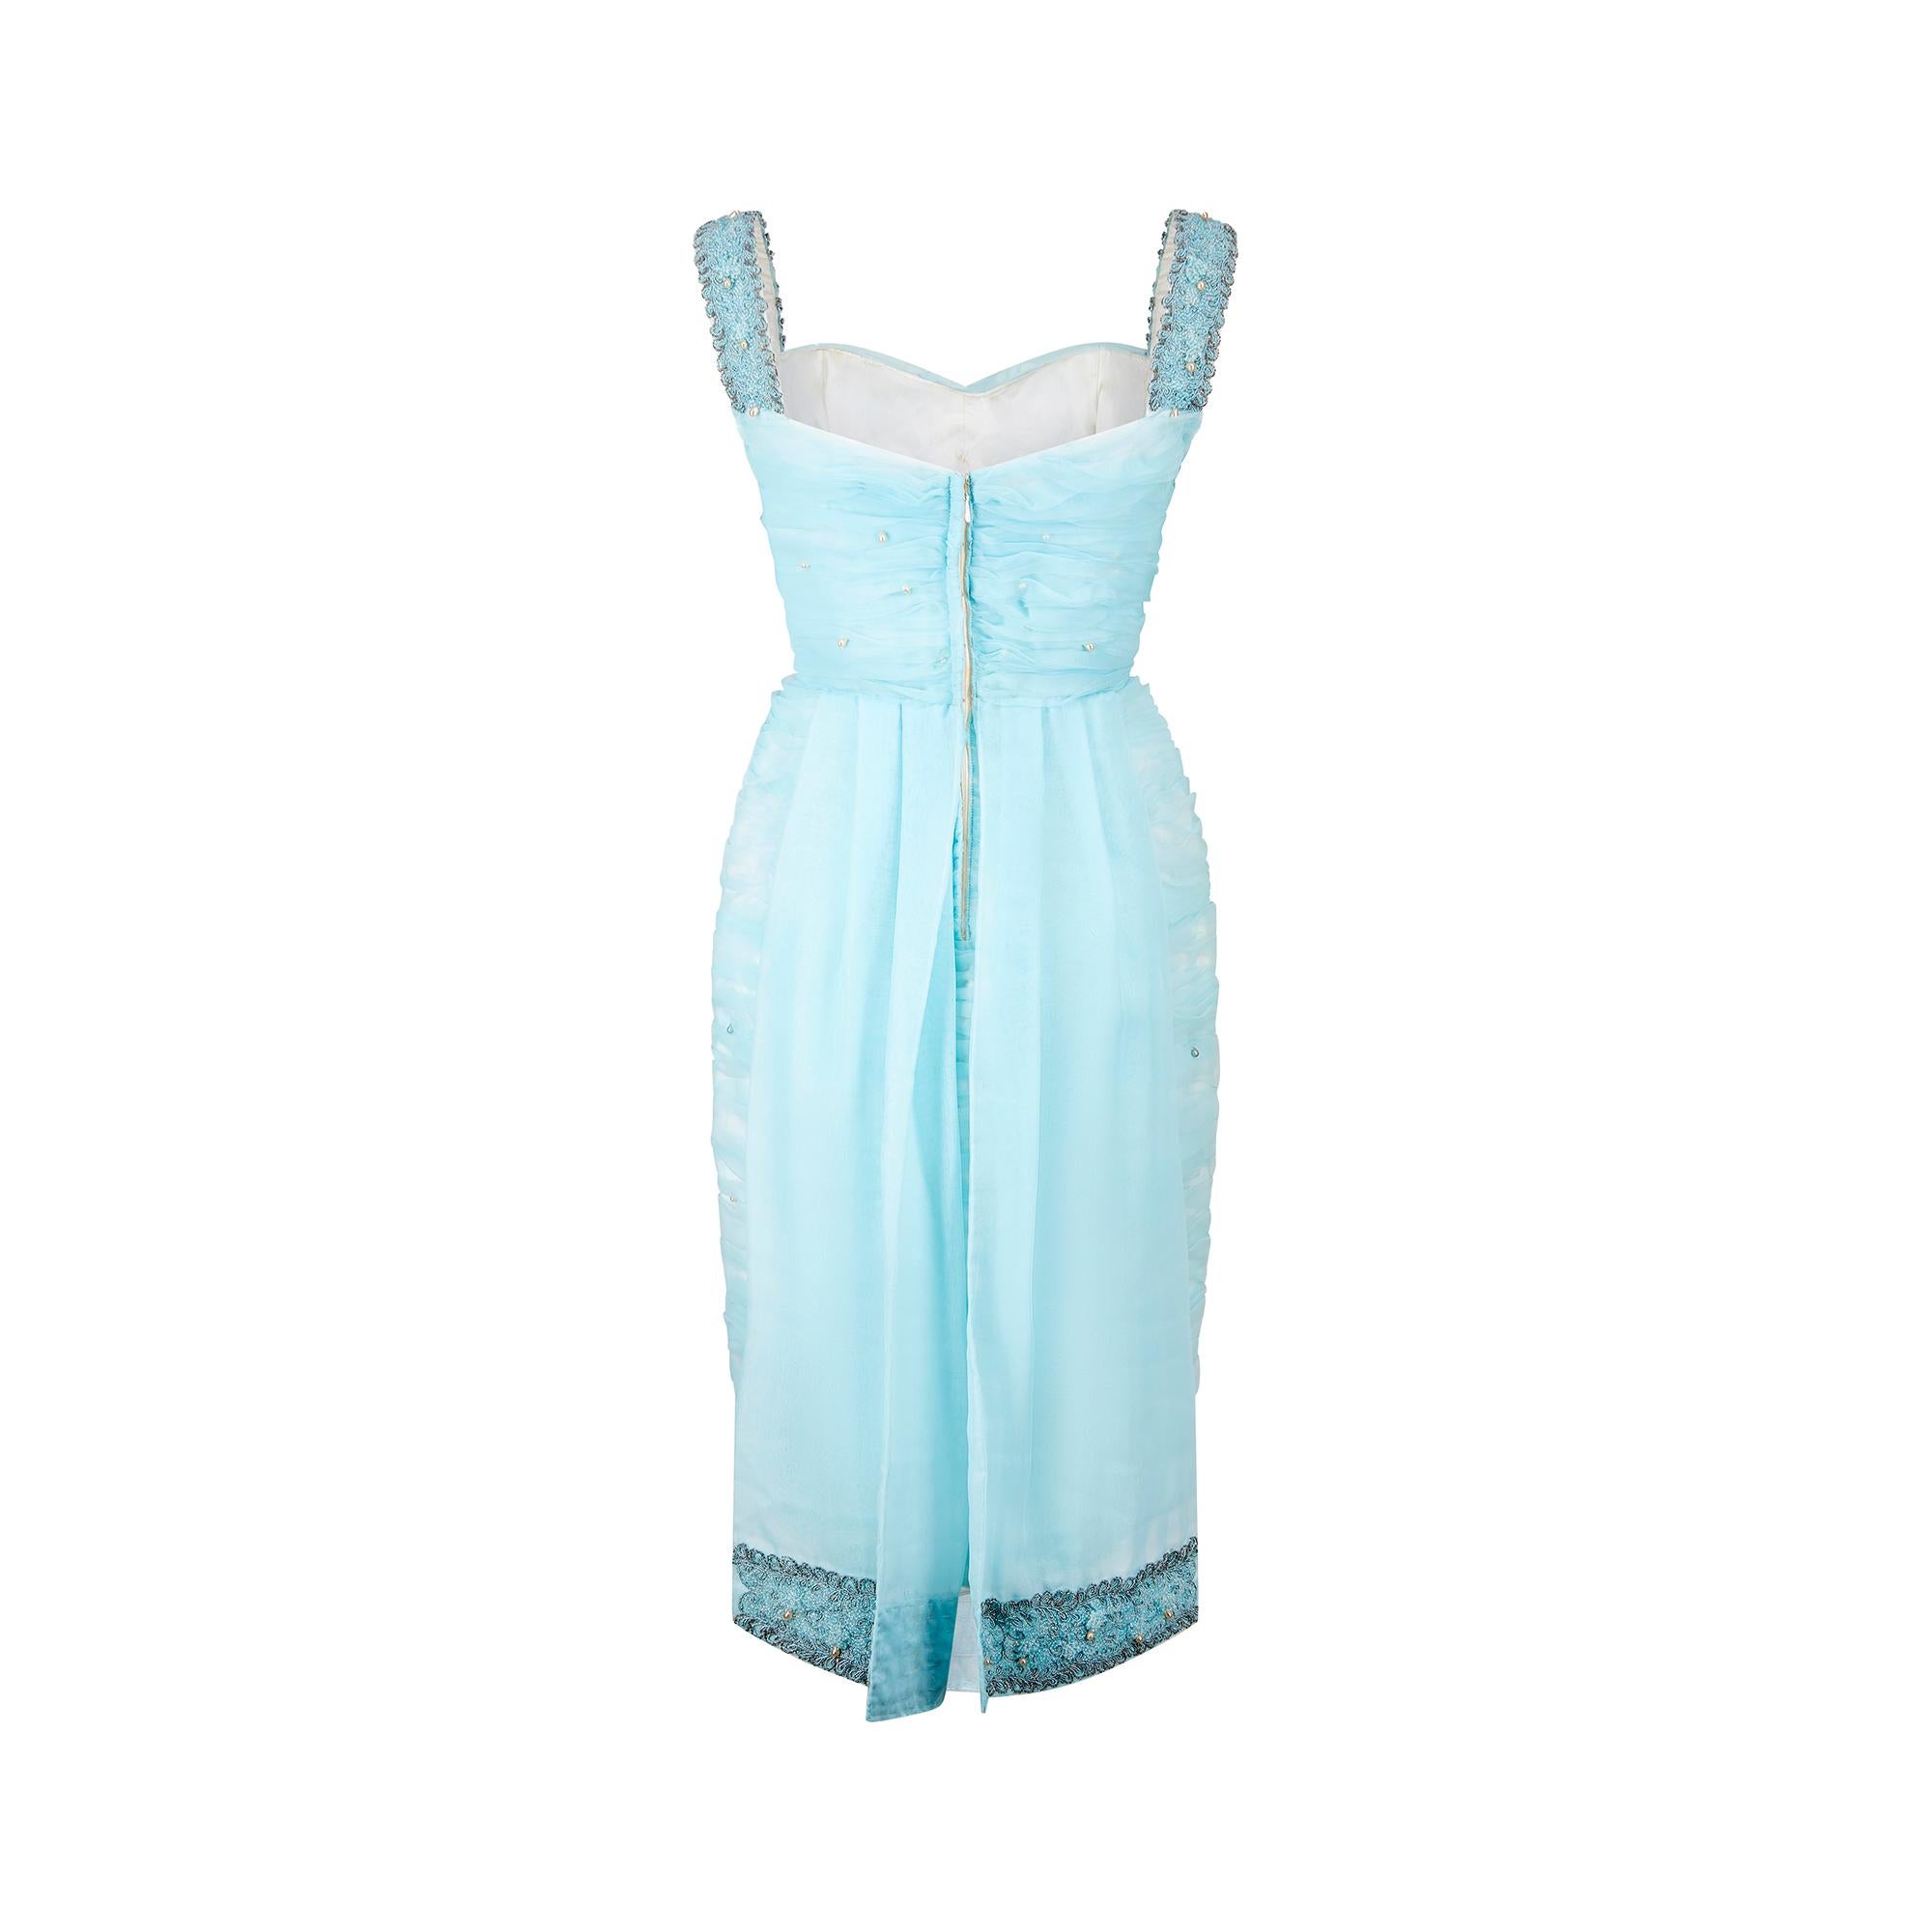 1960s Turquoise Scallop Pleated and Beaded Embellished Shift Dress In Excellent Condition For Sale In London, GB